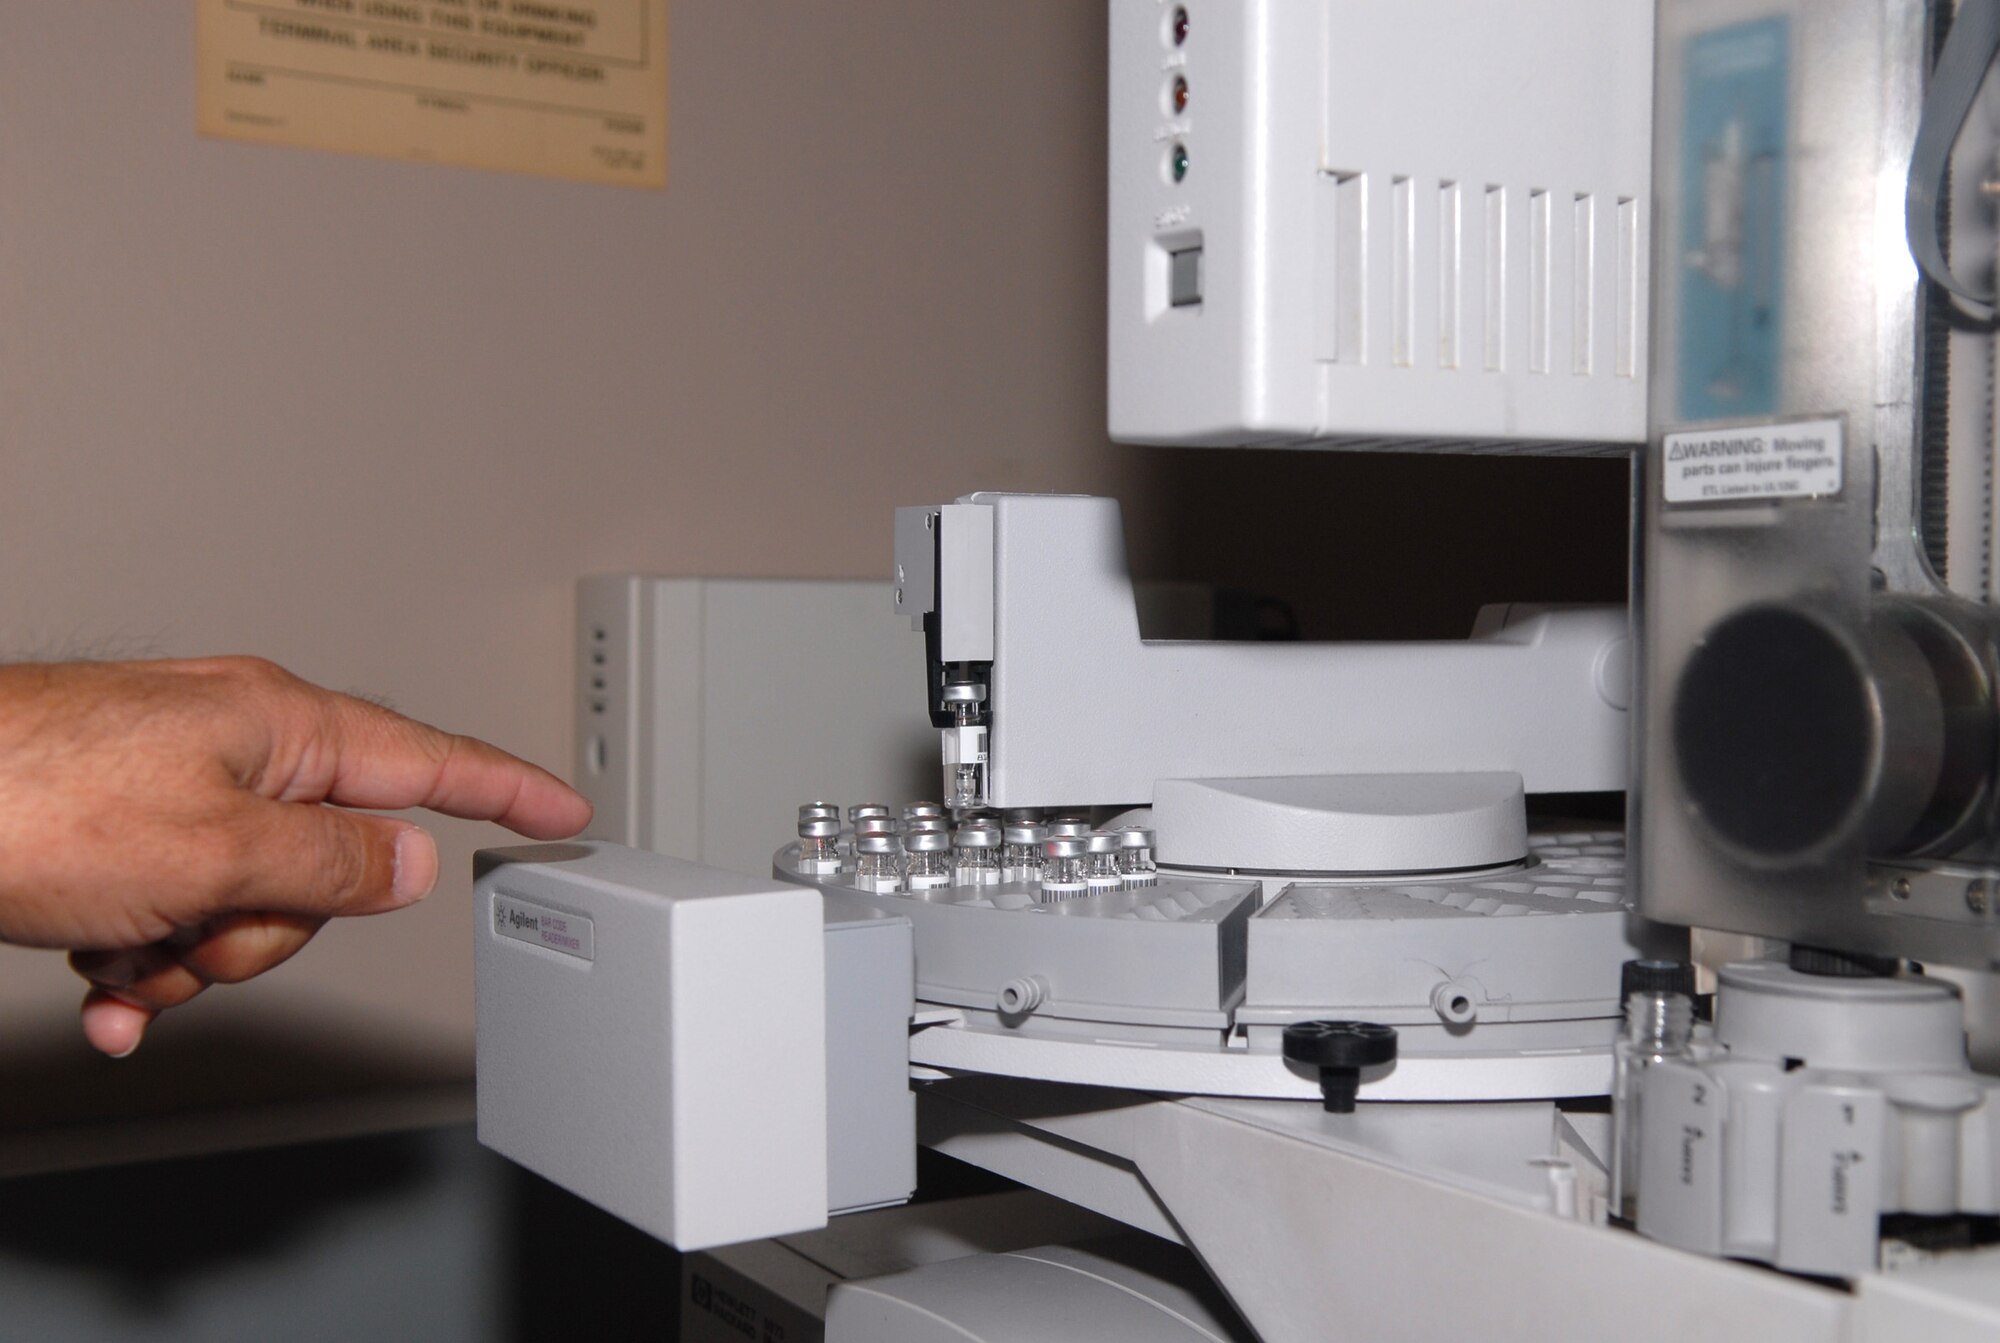 A lab specialist at the military drug testing facility in Texas points out samples prepared for analysis with a gas chromatograph/mass spectrometer. The military laboratory's high-tech equipment can find and identify any drugs present. (Photo by Air Force Tech. Sgt. Cheryl Hackley, National Guard
Bureau) (Released)
